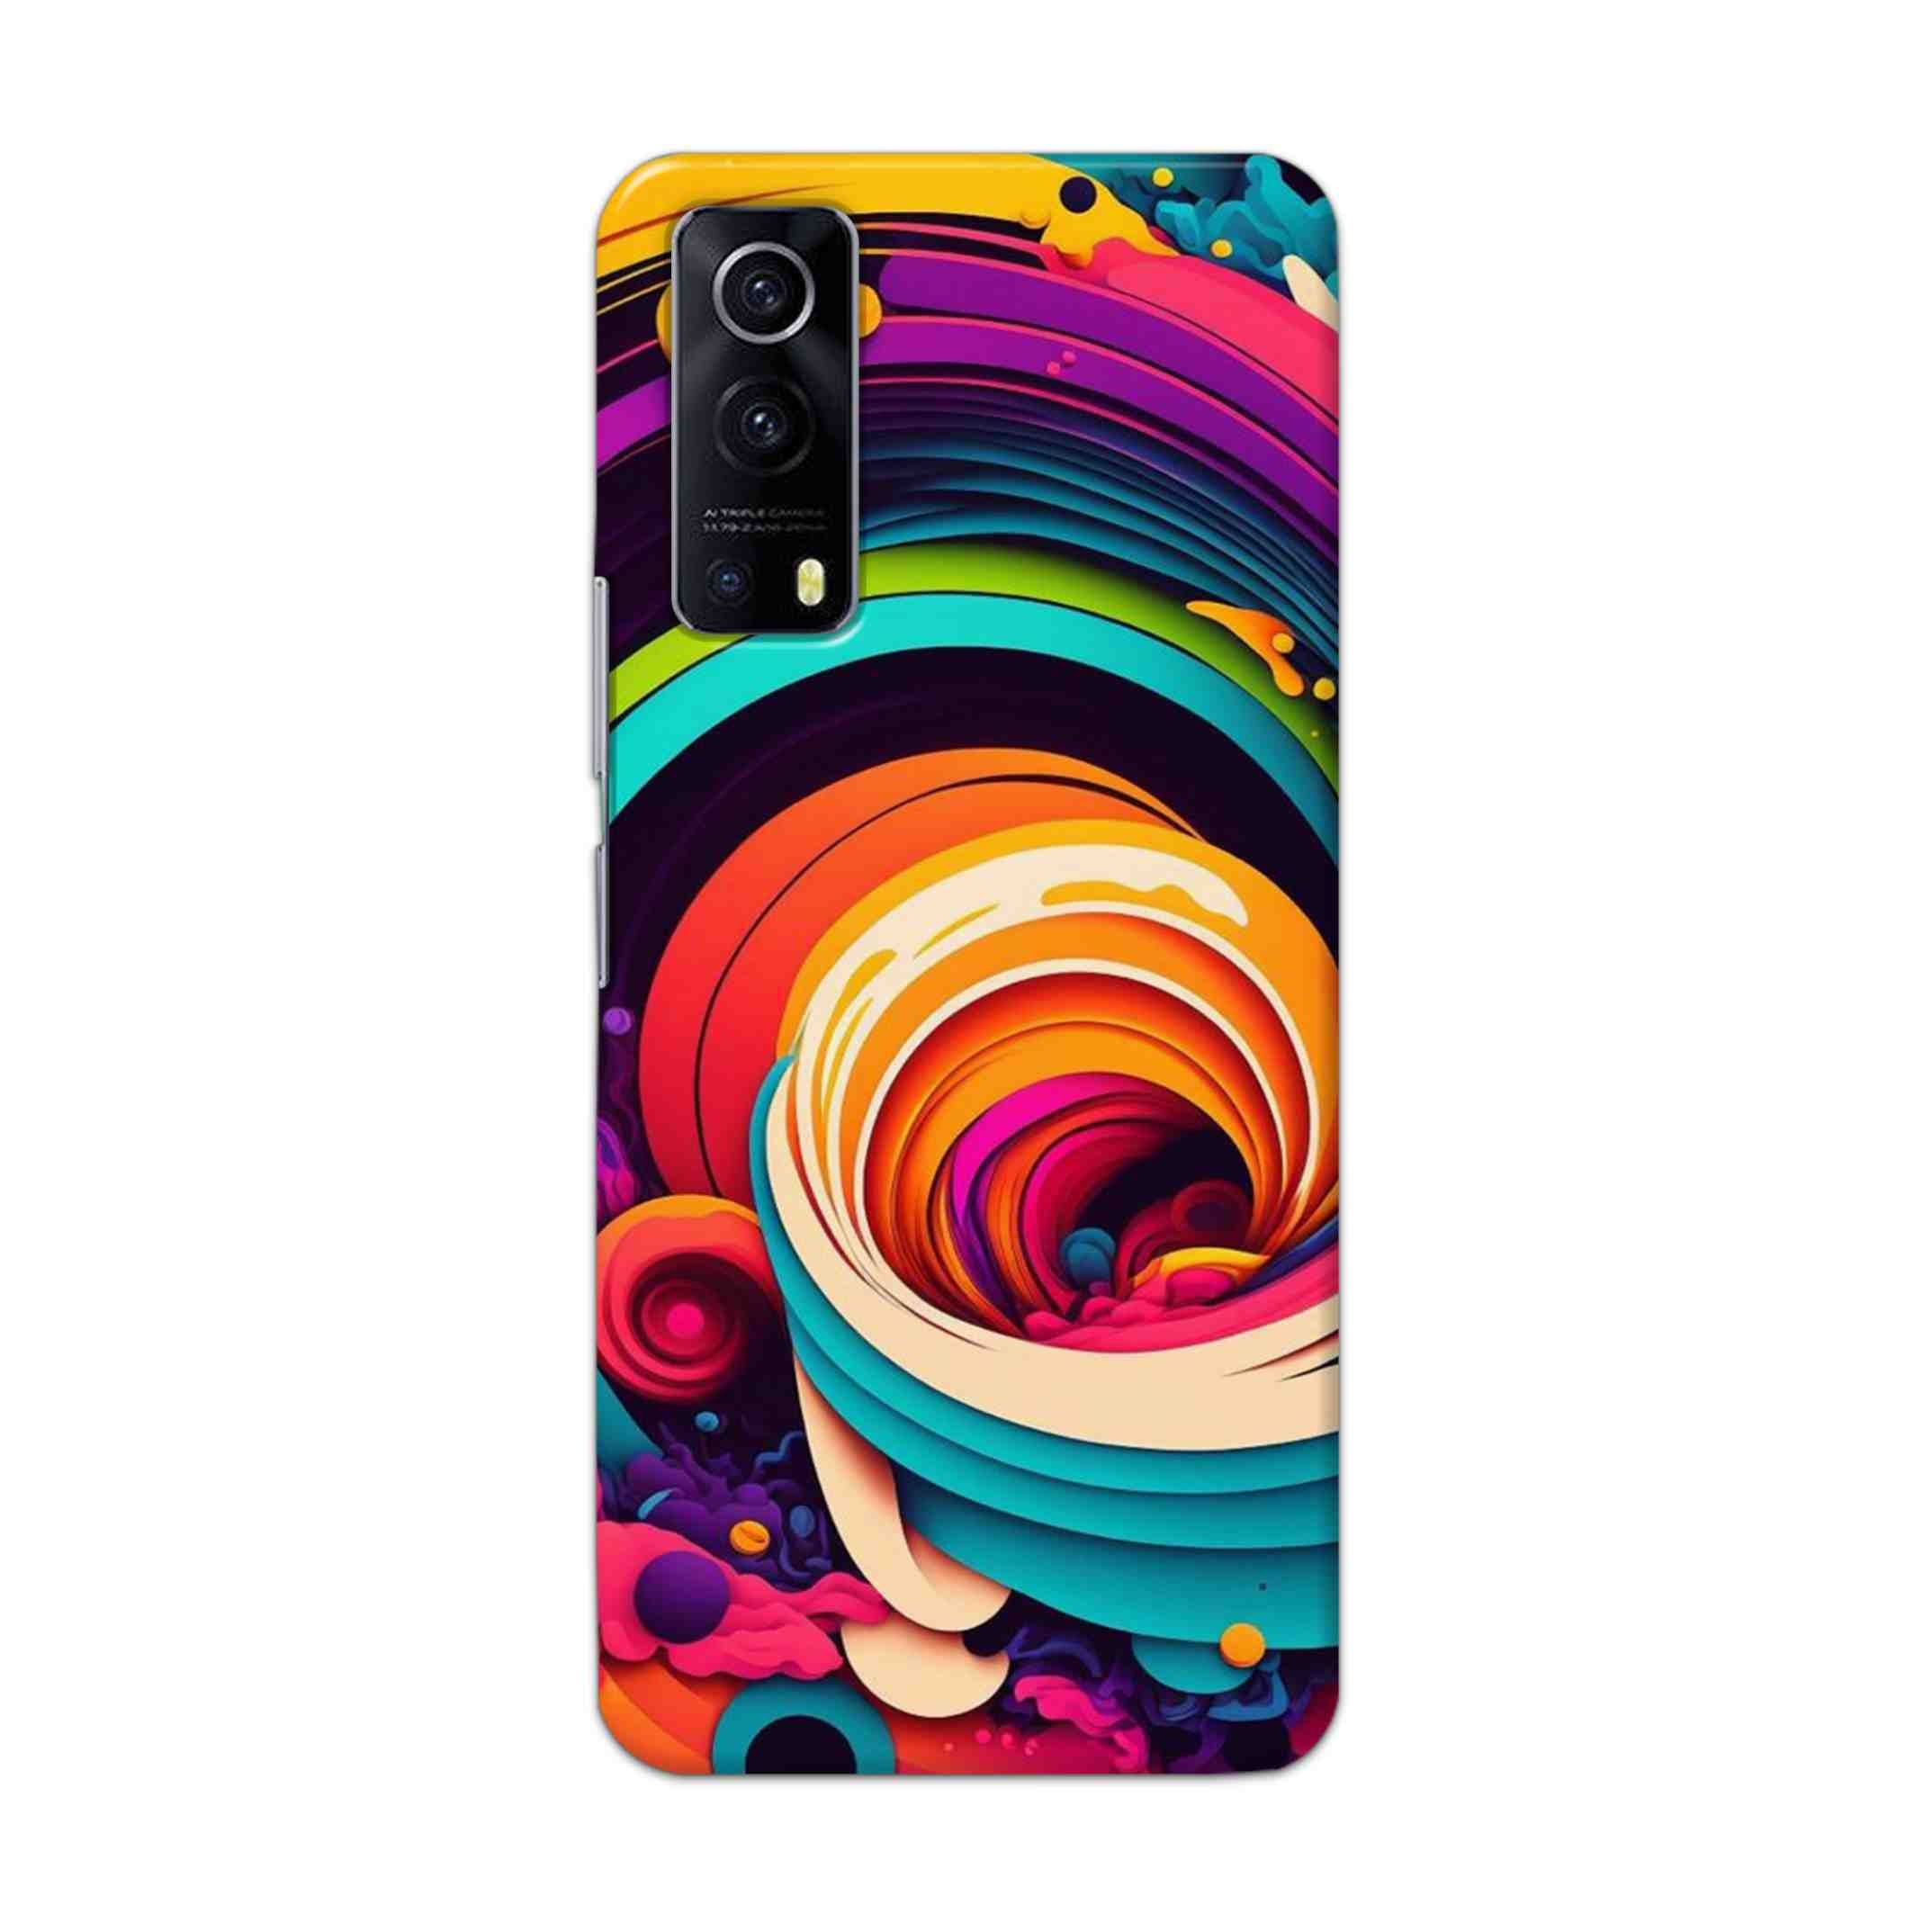 Buy Colour Circle Hard Back Mobile Phone Case Cover For Vivo IQOO Z3 Online